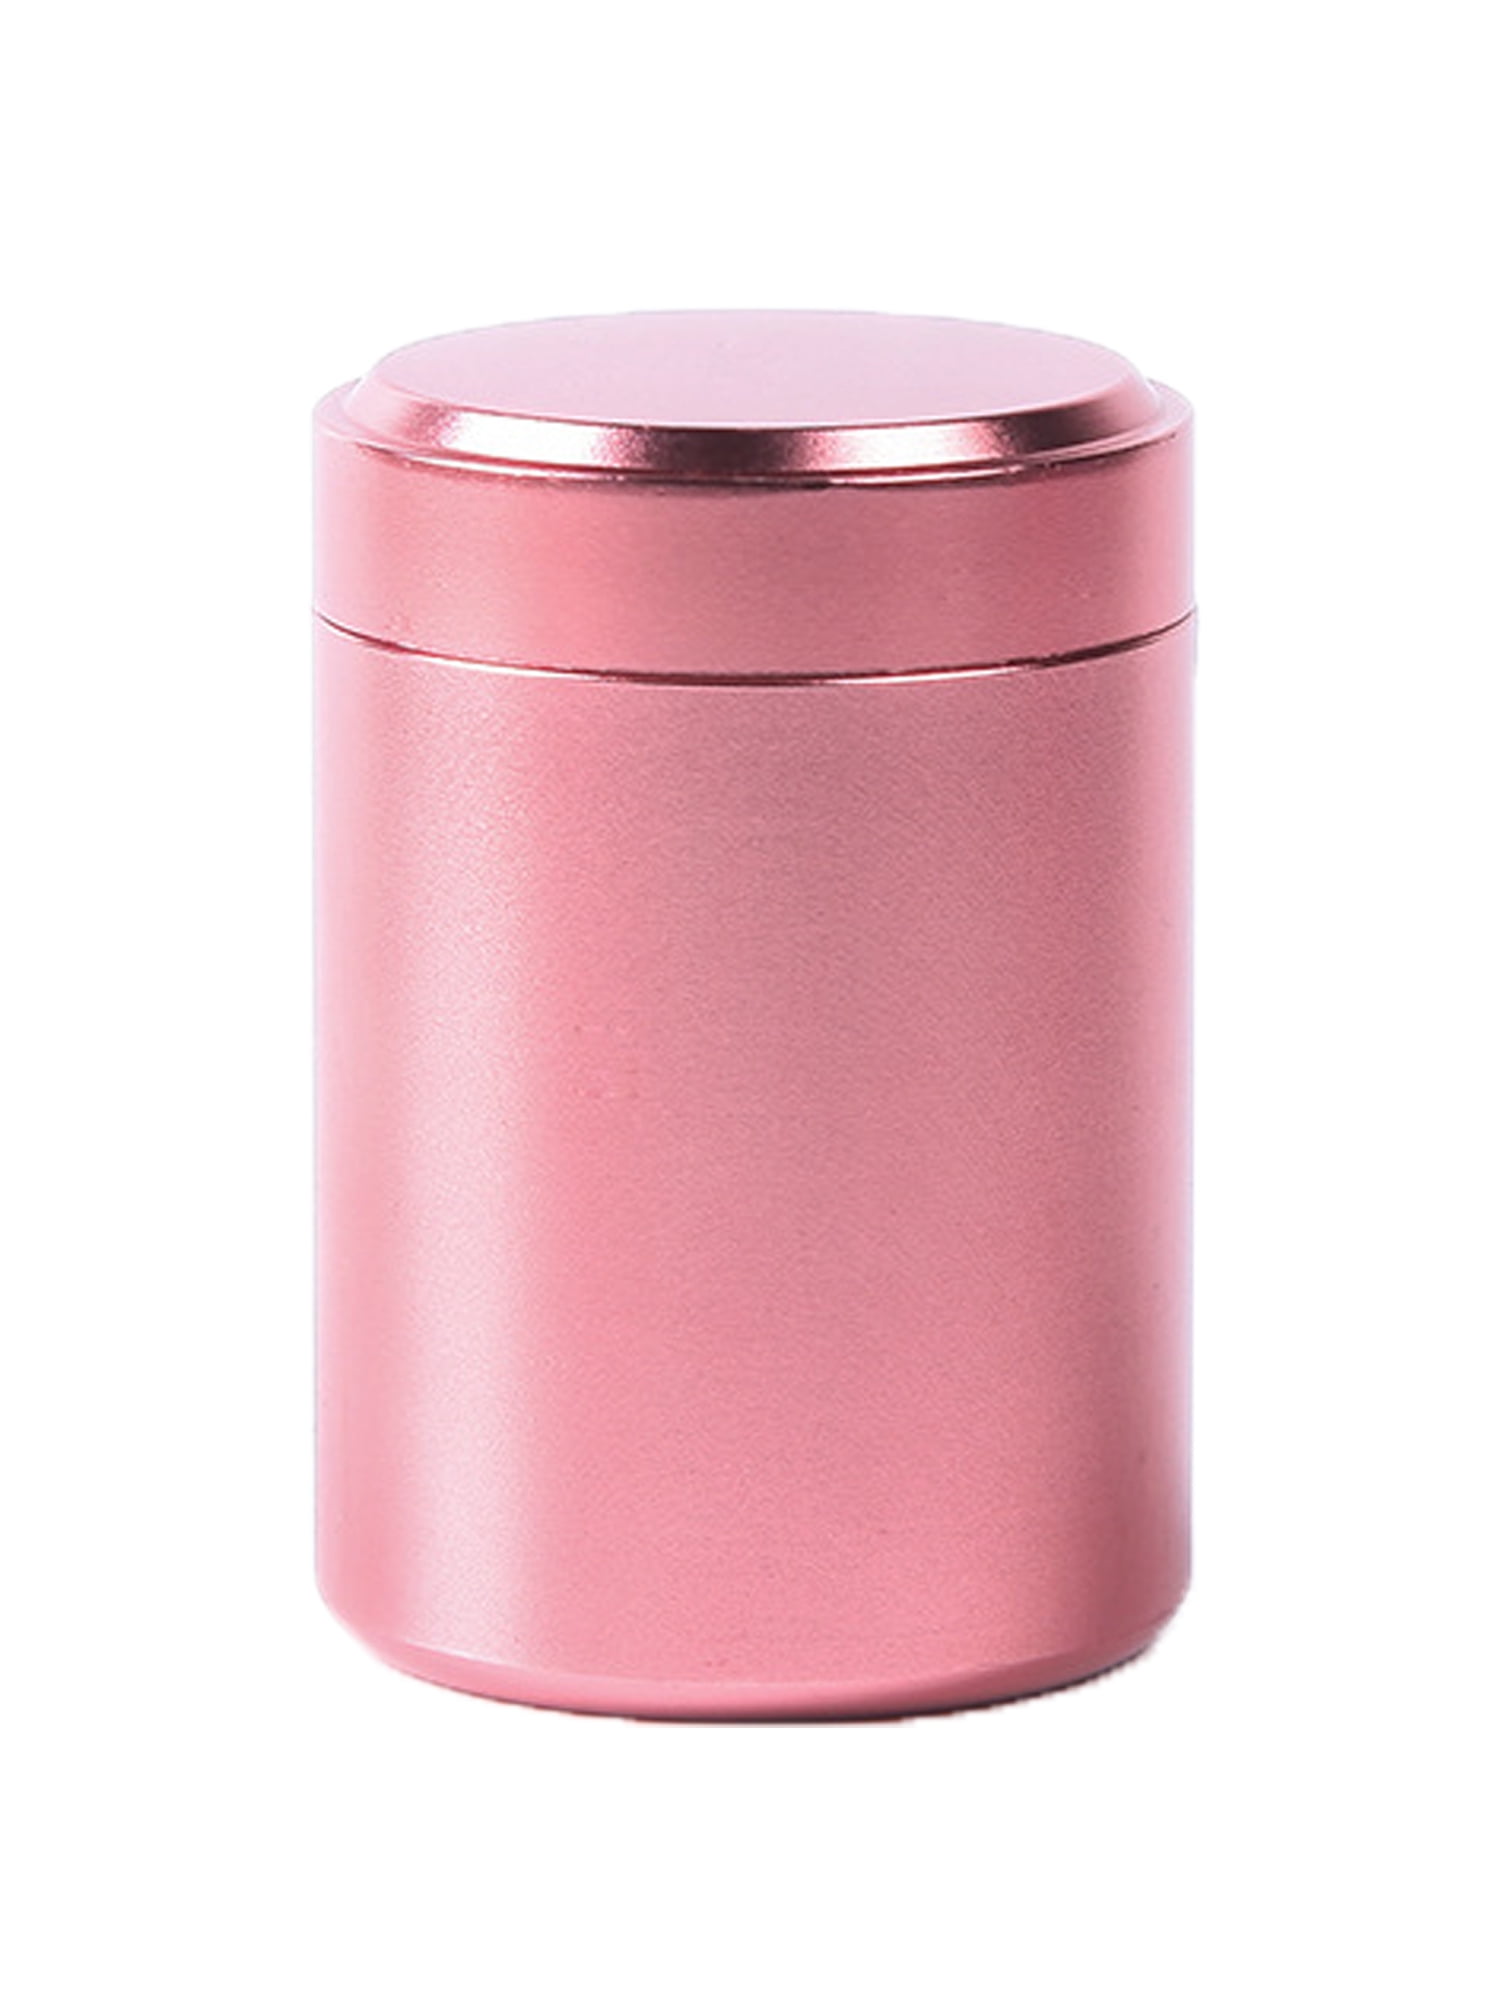  Premium Aluminum Metal Storage Tube - Airtight Smell Proof  Waterproof Vial Container - Odor Eliminating Rubber Seal (Rose Gold) :  Health & Household